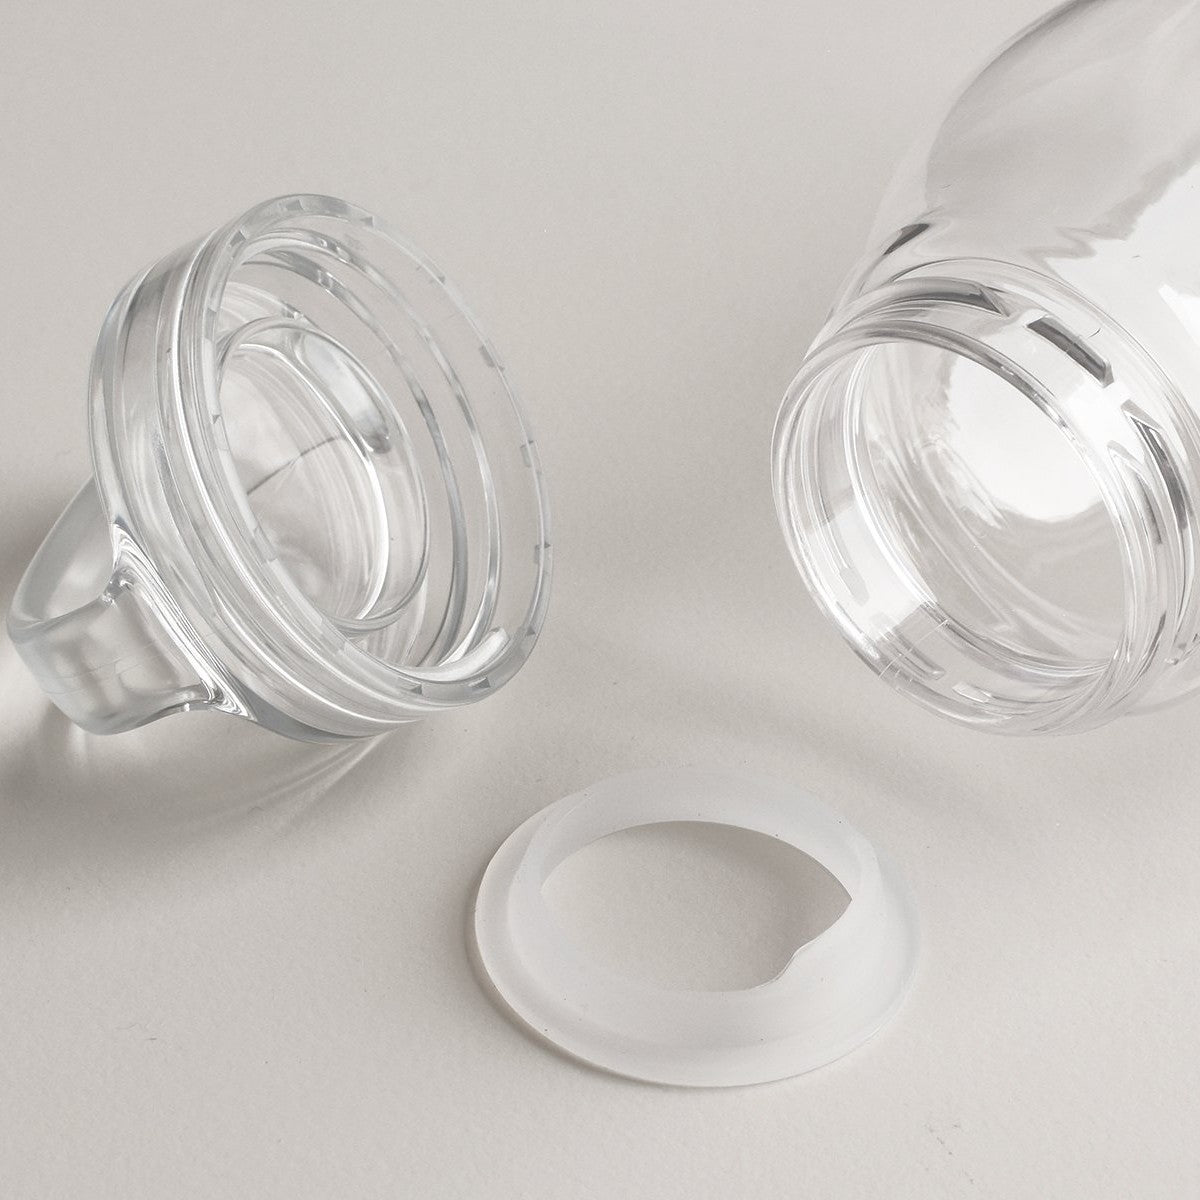 KINTO WATER BOTTLE SILICONE RING SET OF 2 CLEAR